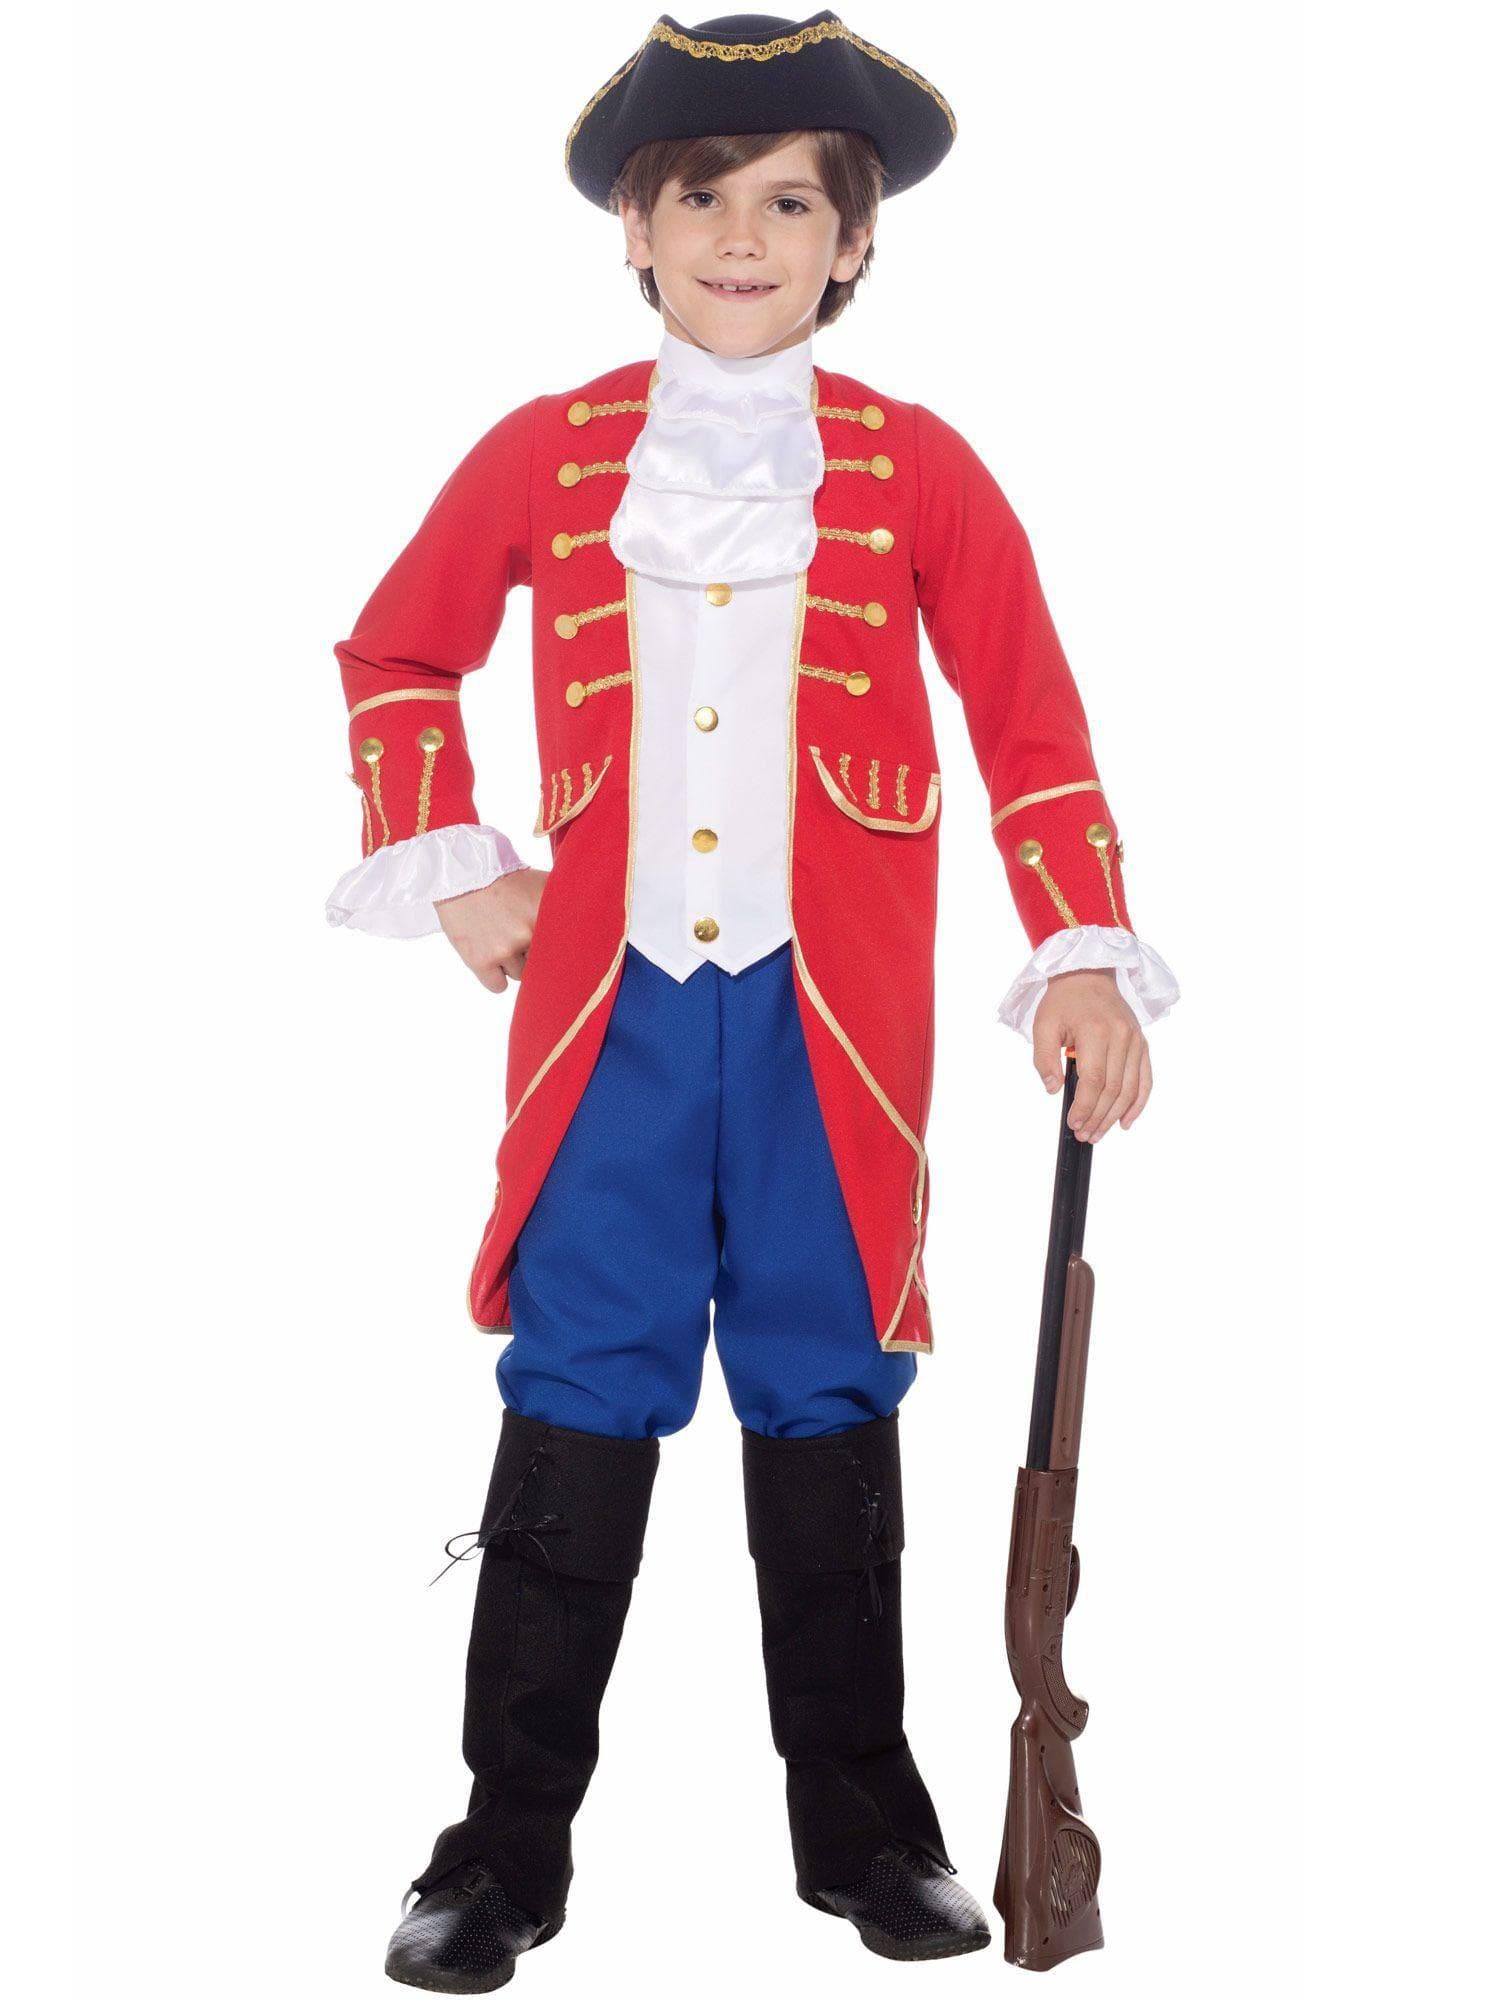 Kid's Founding Father Costume - costumes.com